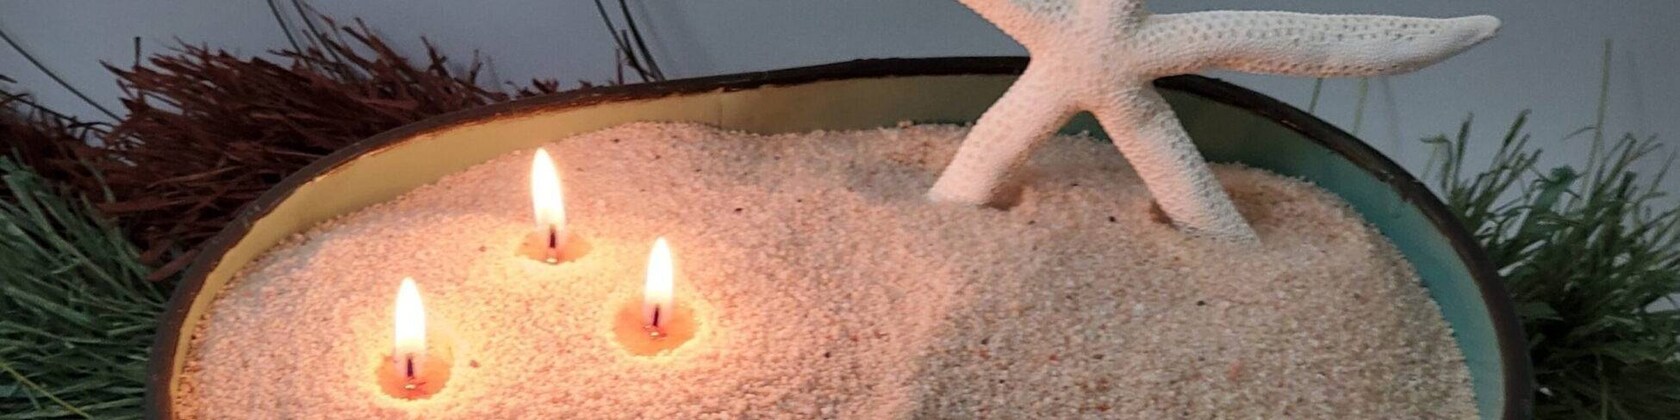  Sand Candle > Make Your Own Sand Candles Pour on Surface-  Floats on Water- Candle Making Supplies Personalized Candles - 1 lb Bag (2  Wicks Included) Beach (Natural)